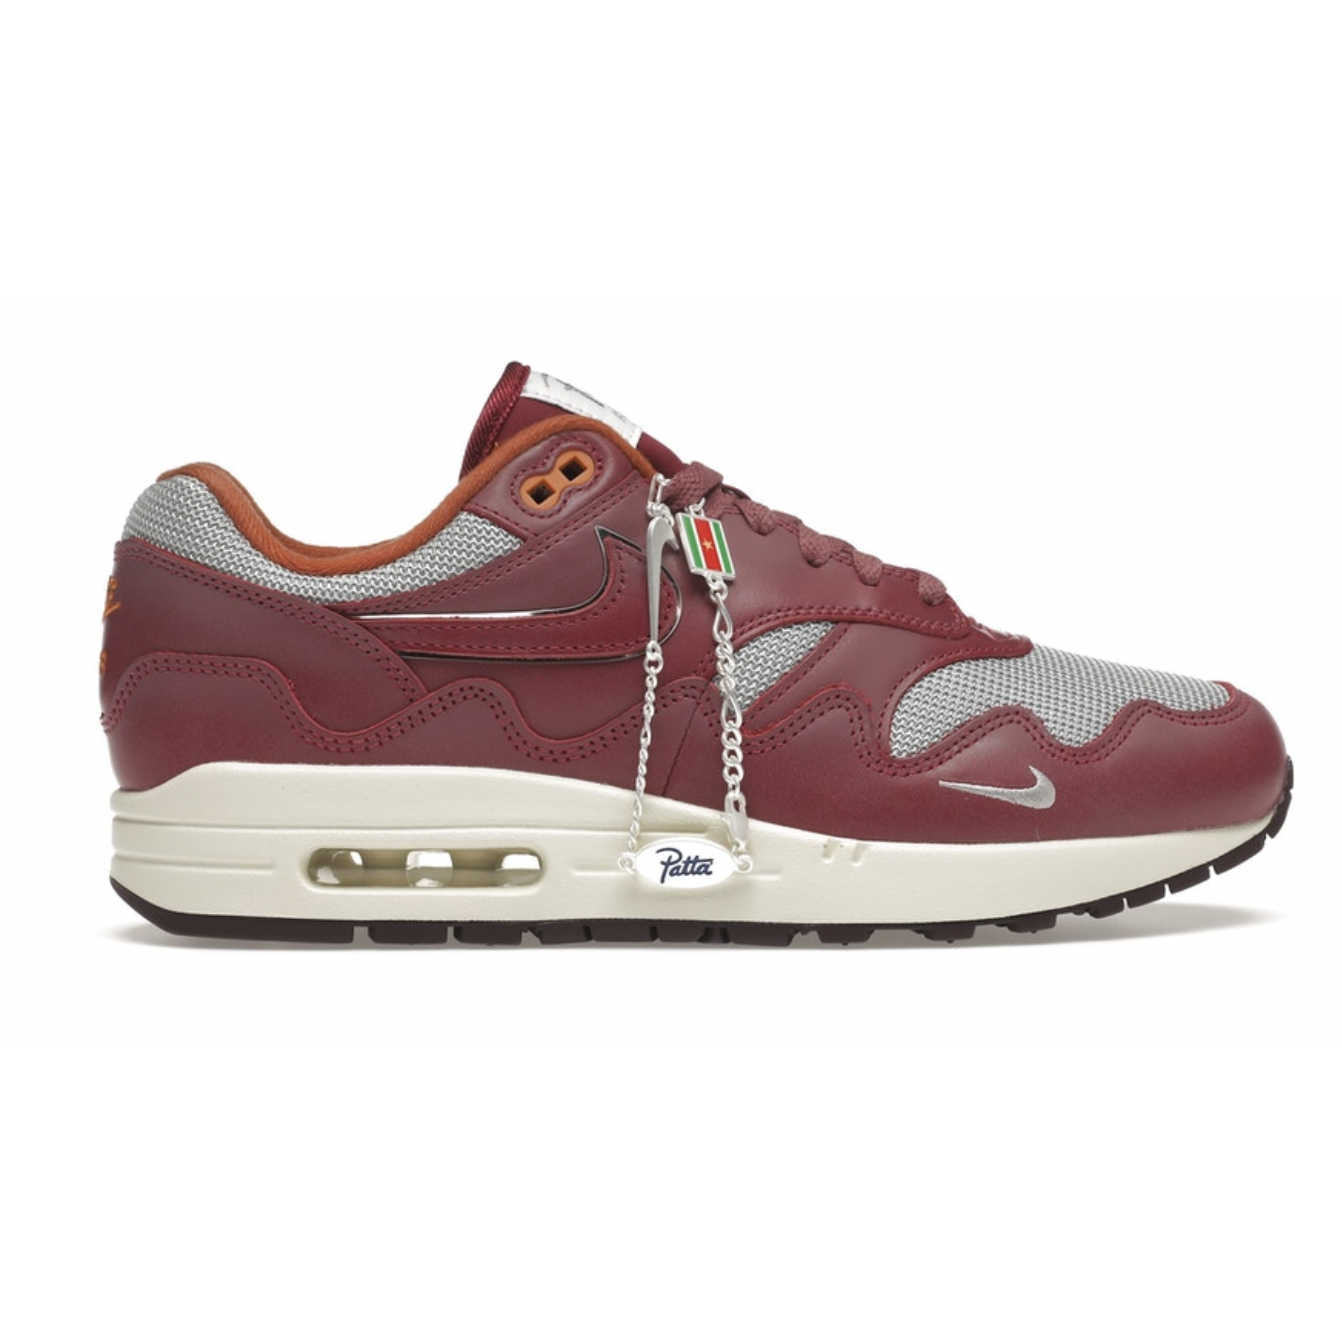 Nike Air Max 1 Patta Waves Rush Maroon (with Bracelet) from Nike